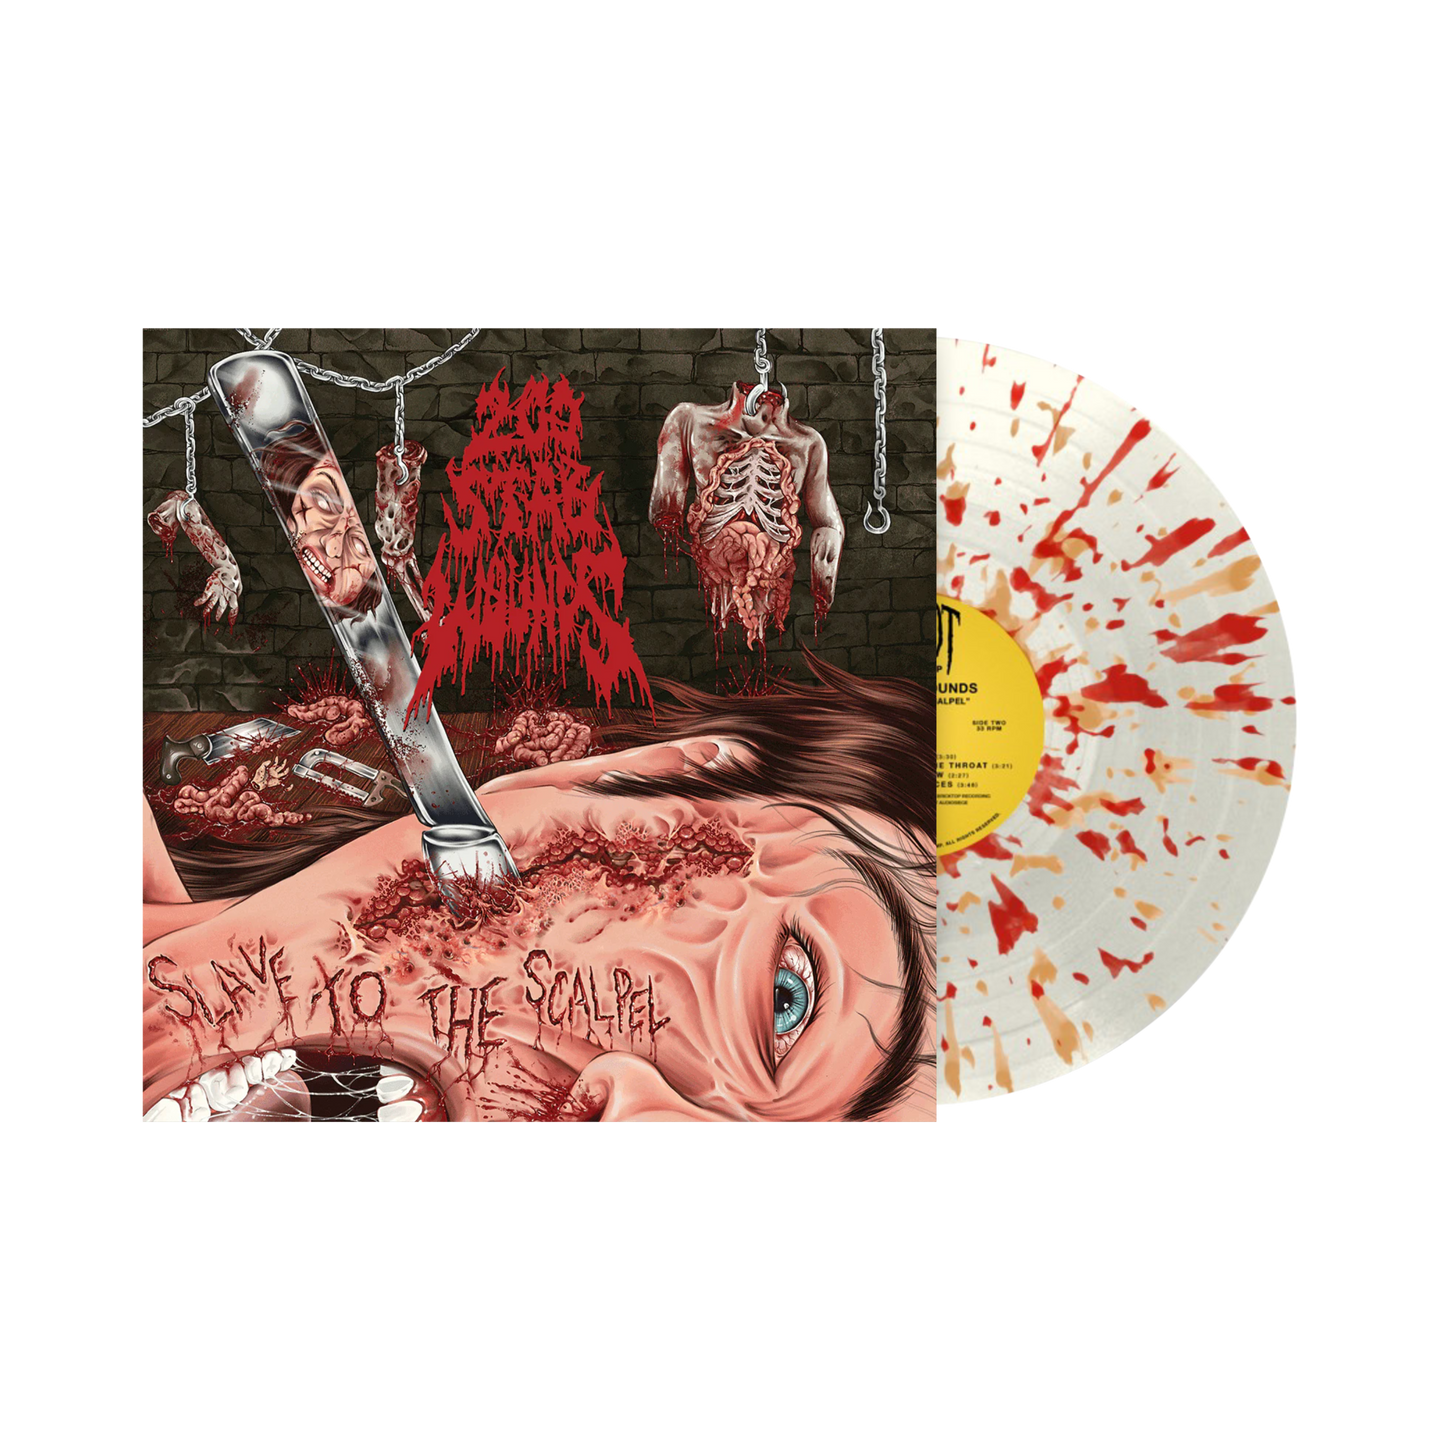 200 Stab Wounds "Slave To The Scalpel" LP